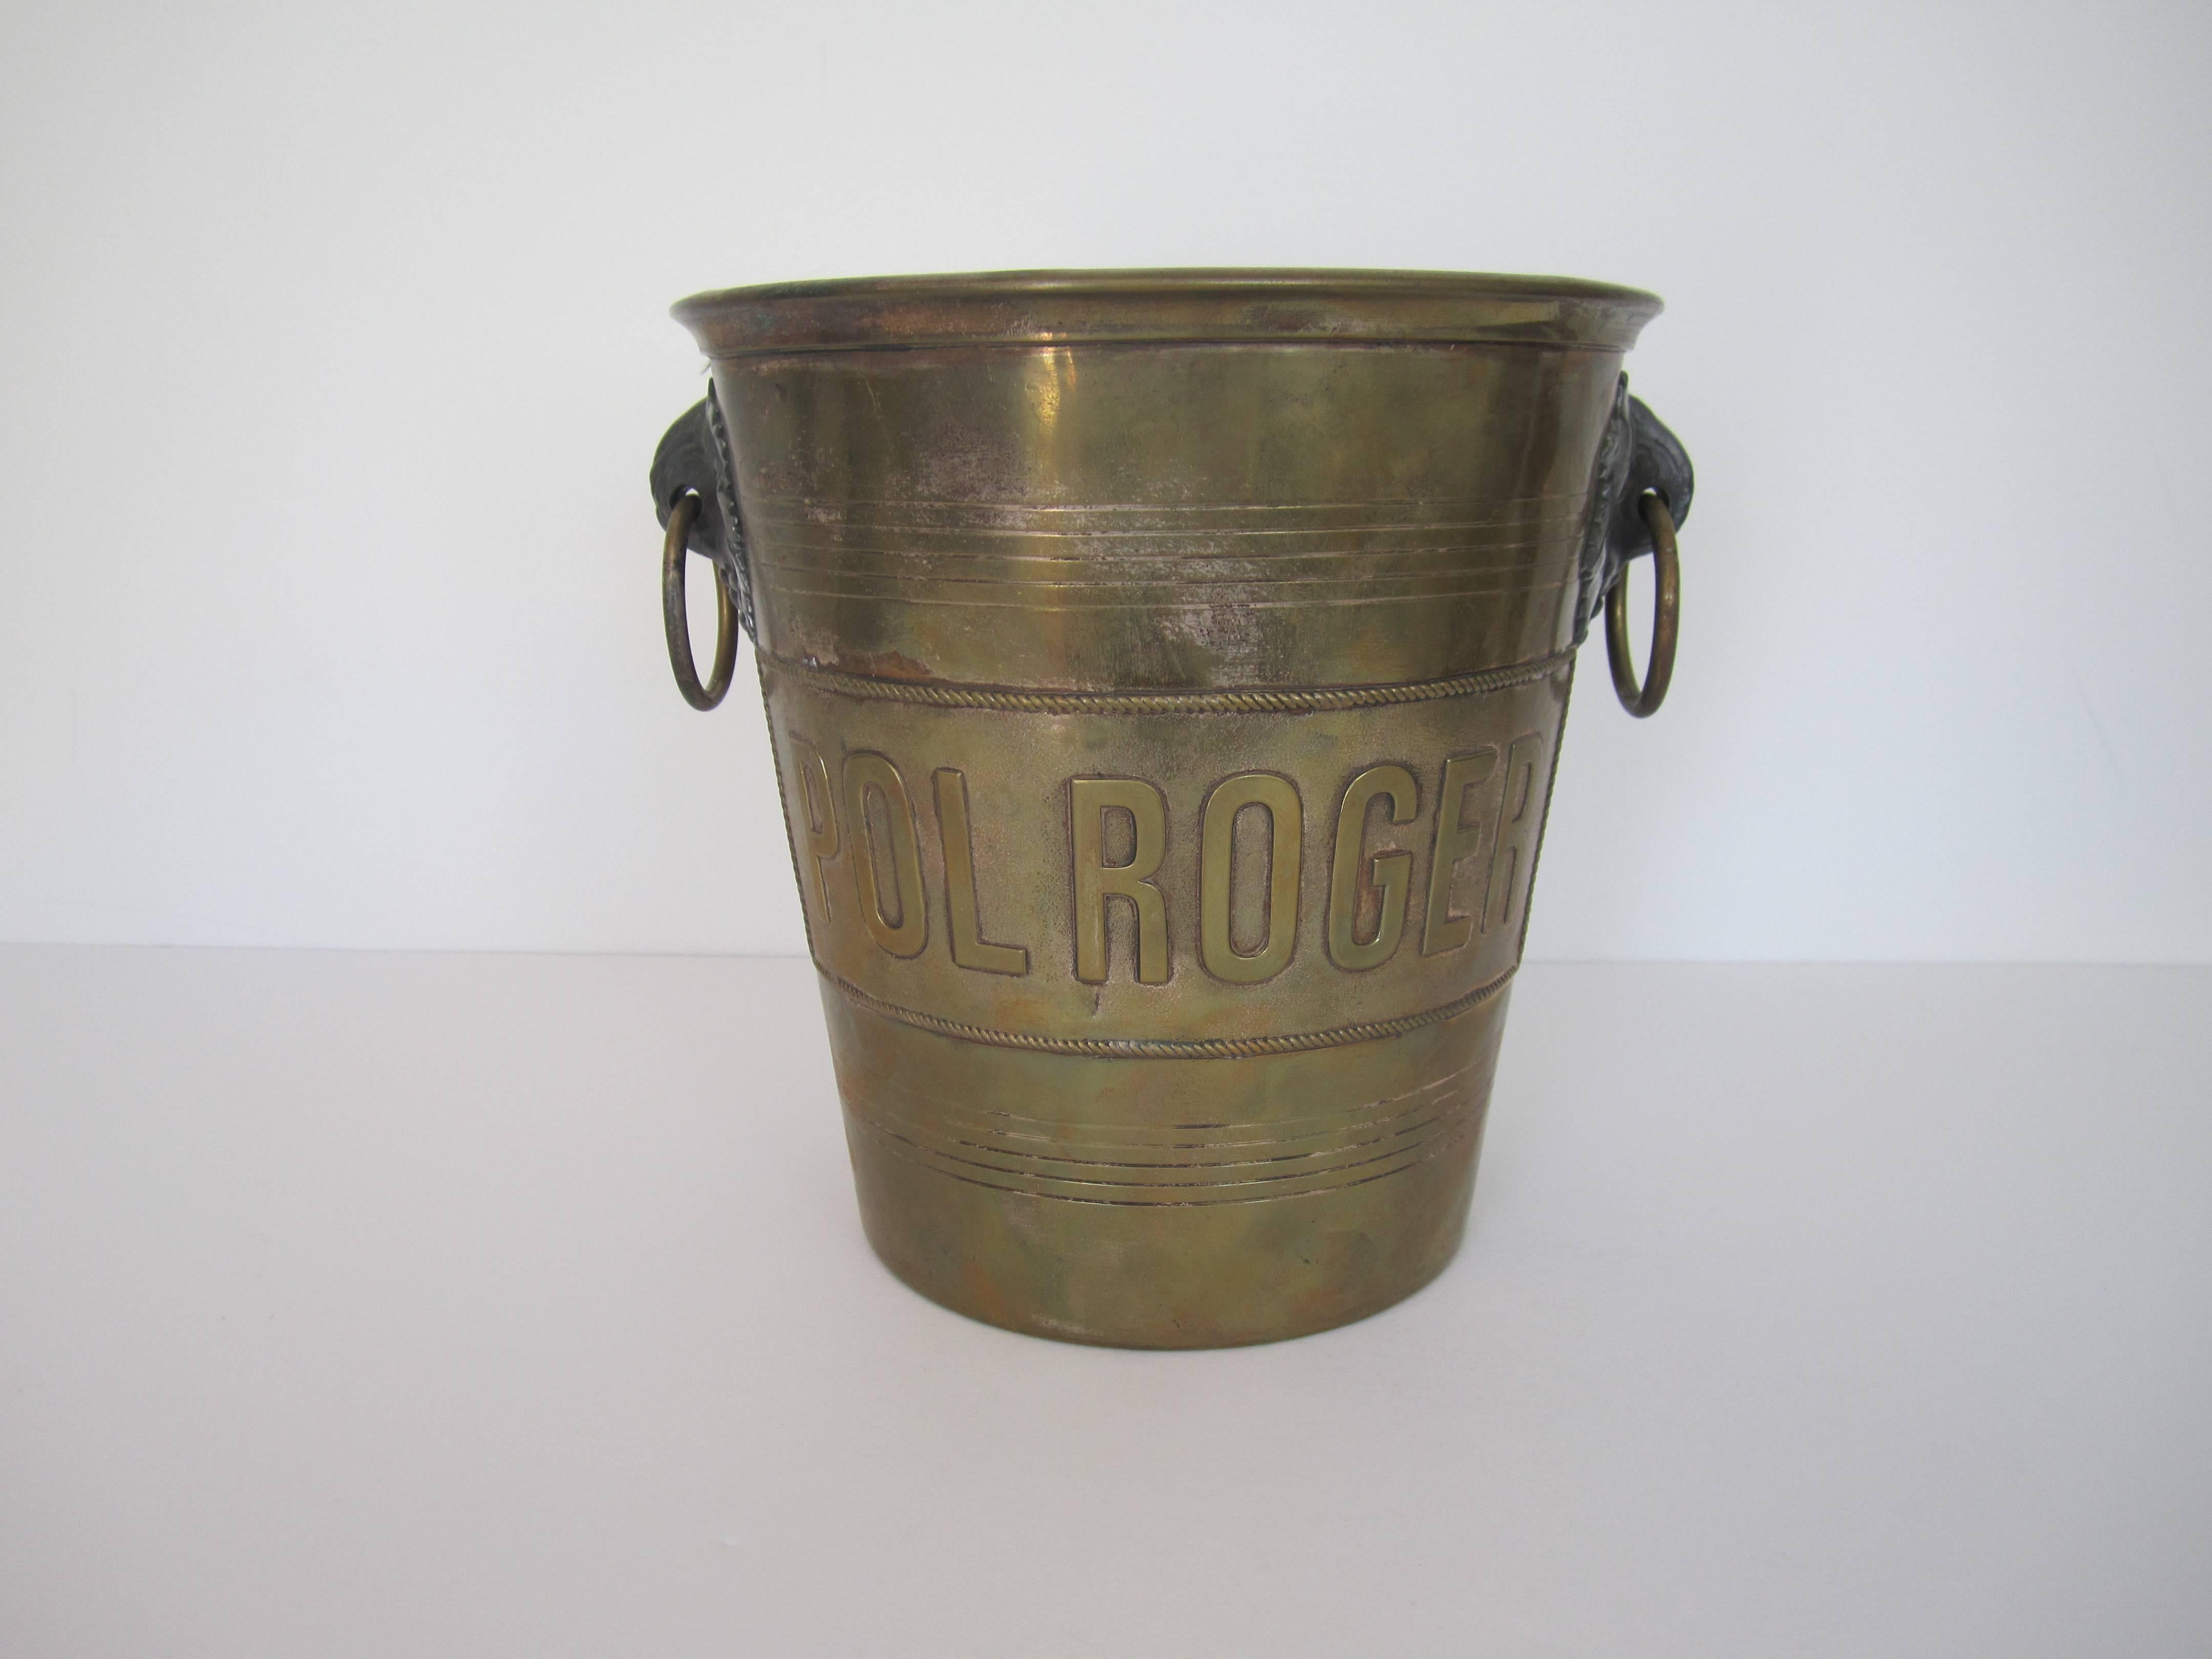 A vintage brass 'Pol Roger' Champagne ice bucket, from Paris. 'Pol Roger' across front with loop handles and grape leaf design on sides. Made in France. Item available here online. By request, item can be made available by appointment to the Trade